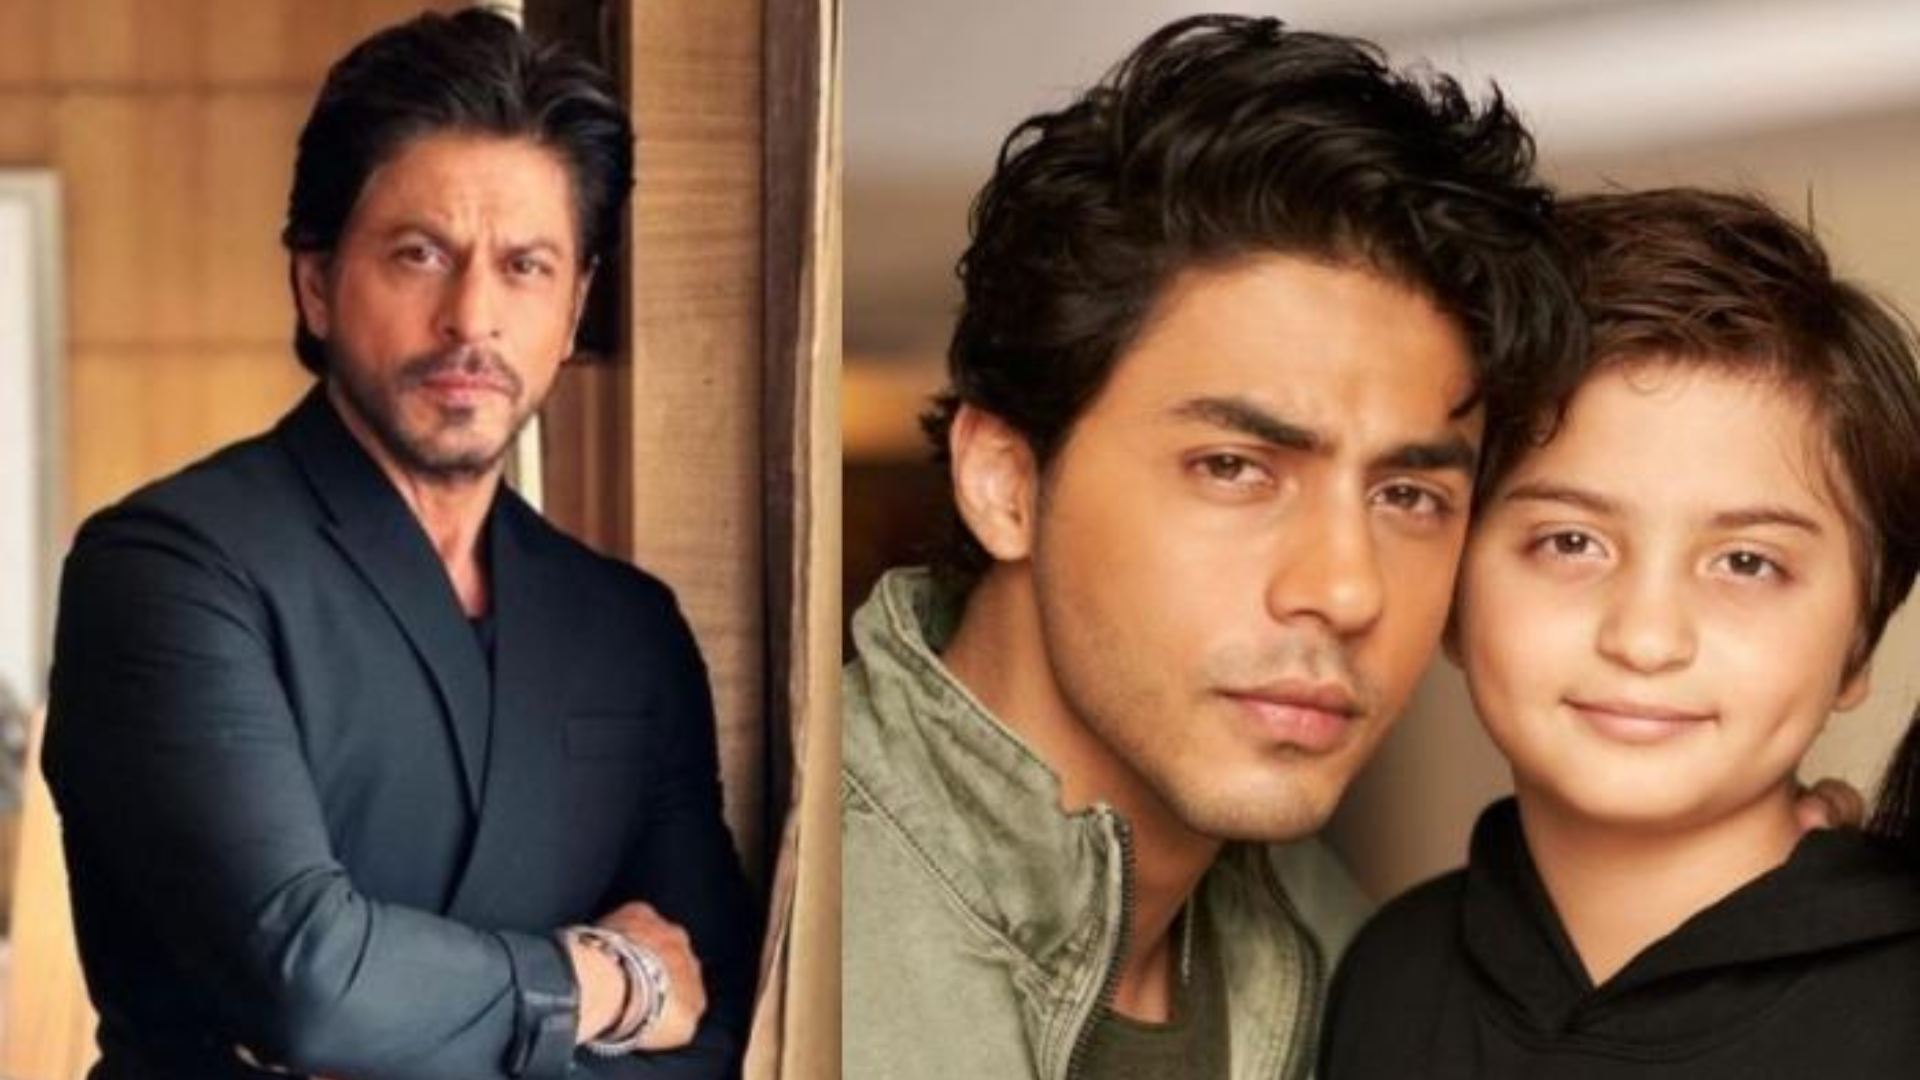 Why Is Shah Rukh Khan Avoiding Media Since 2021? ‘He’s Mad For What They Did To His Son’: Here’s What We Know